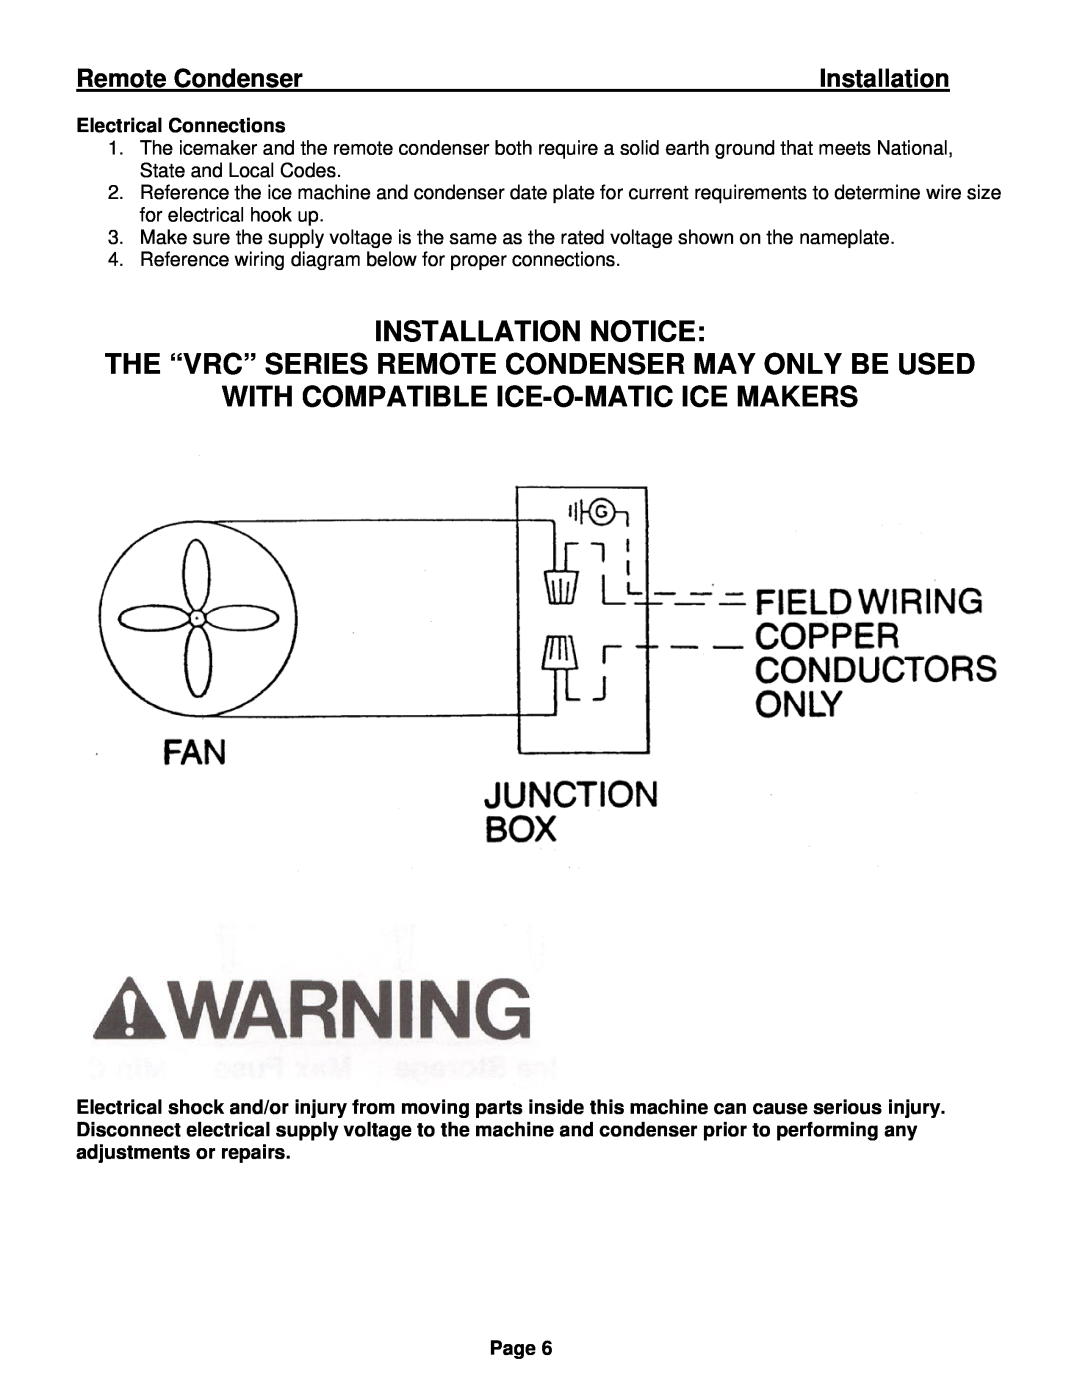 Ice-O-Matic VRC manual Installation Notice, With Compatible Ice-O-Maticice Makers, Remote Condenser 